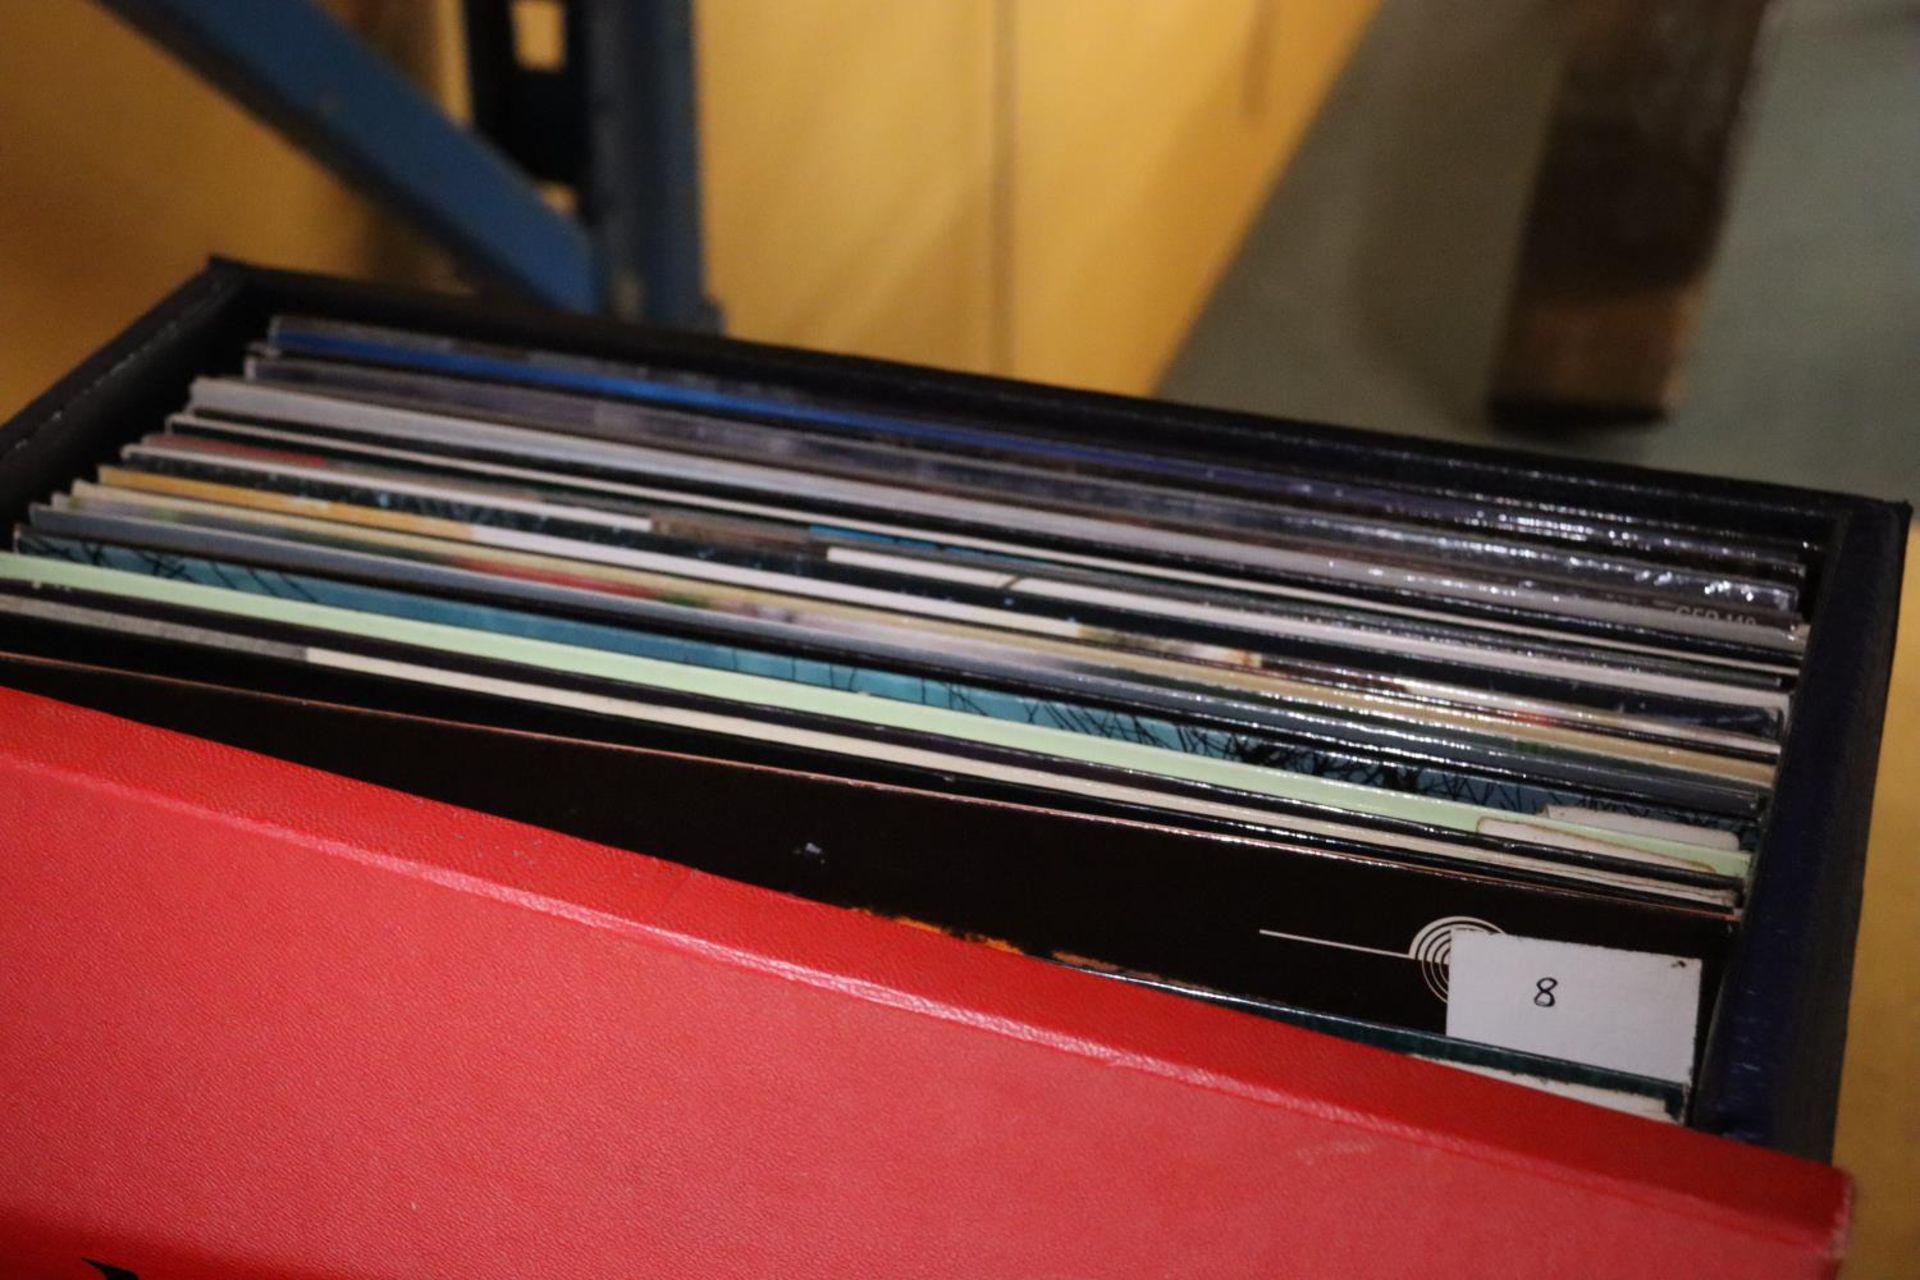 A COLLECTION OF CLASICAL LP VINYL RECORDS IN A CASE - Image 2 of 5